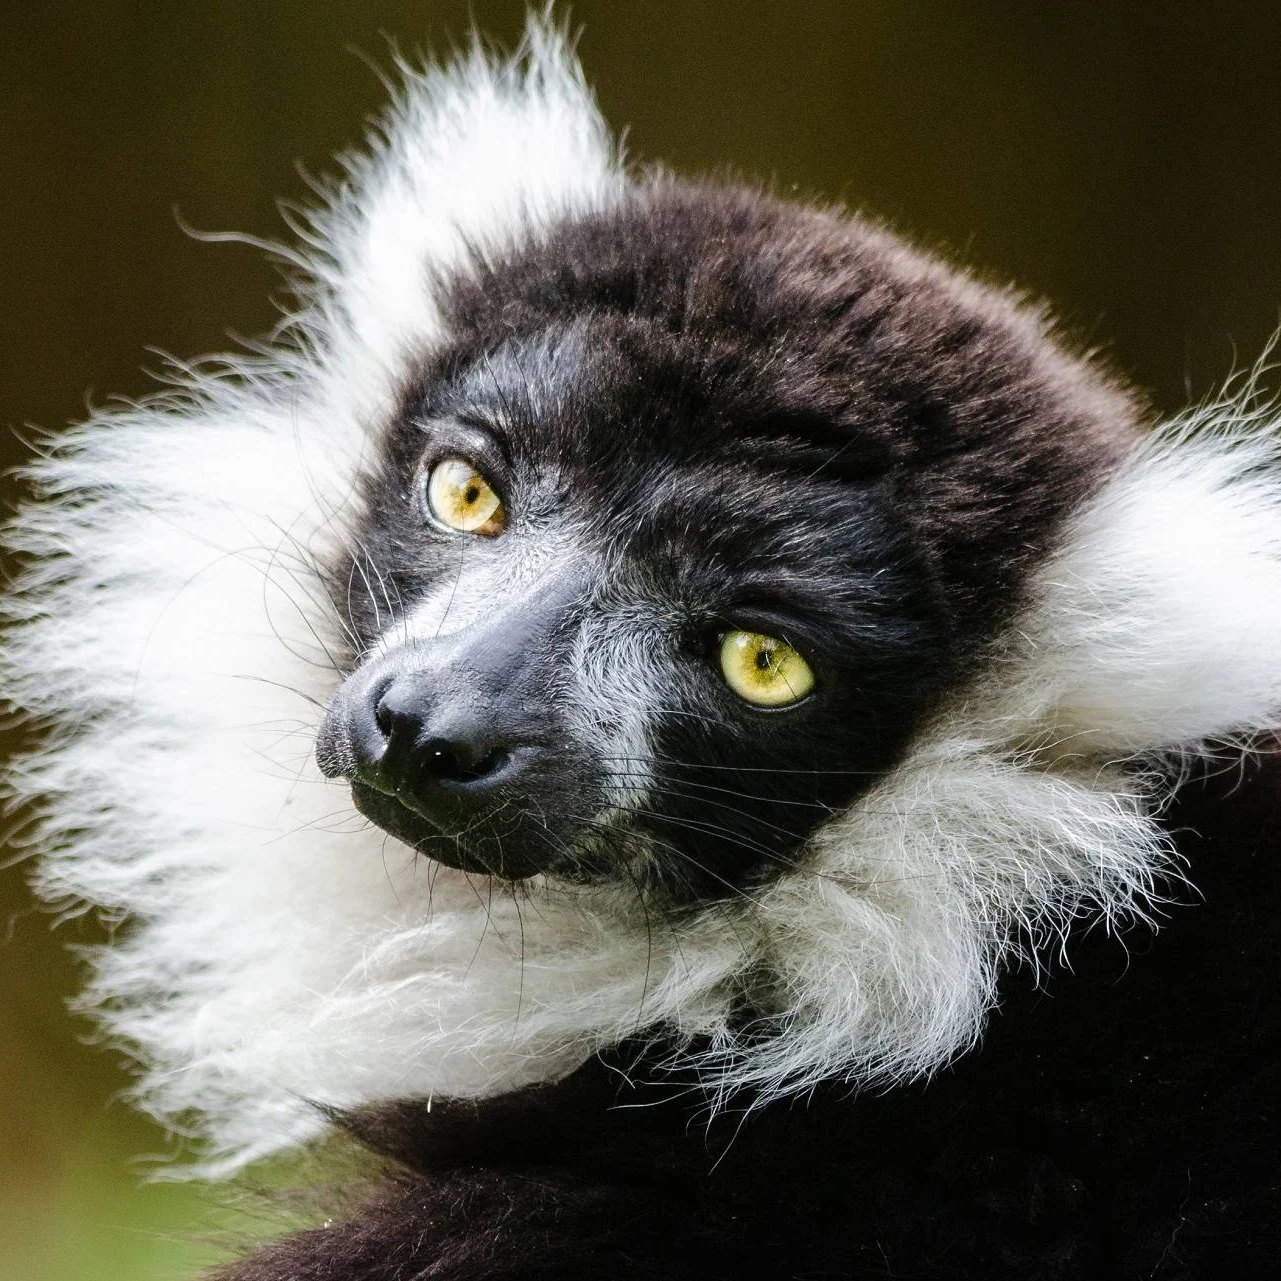 Close up of a black and white ruffed lemur